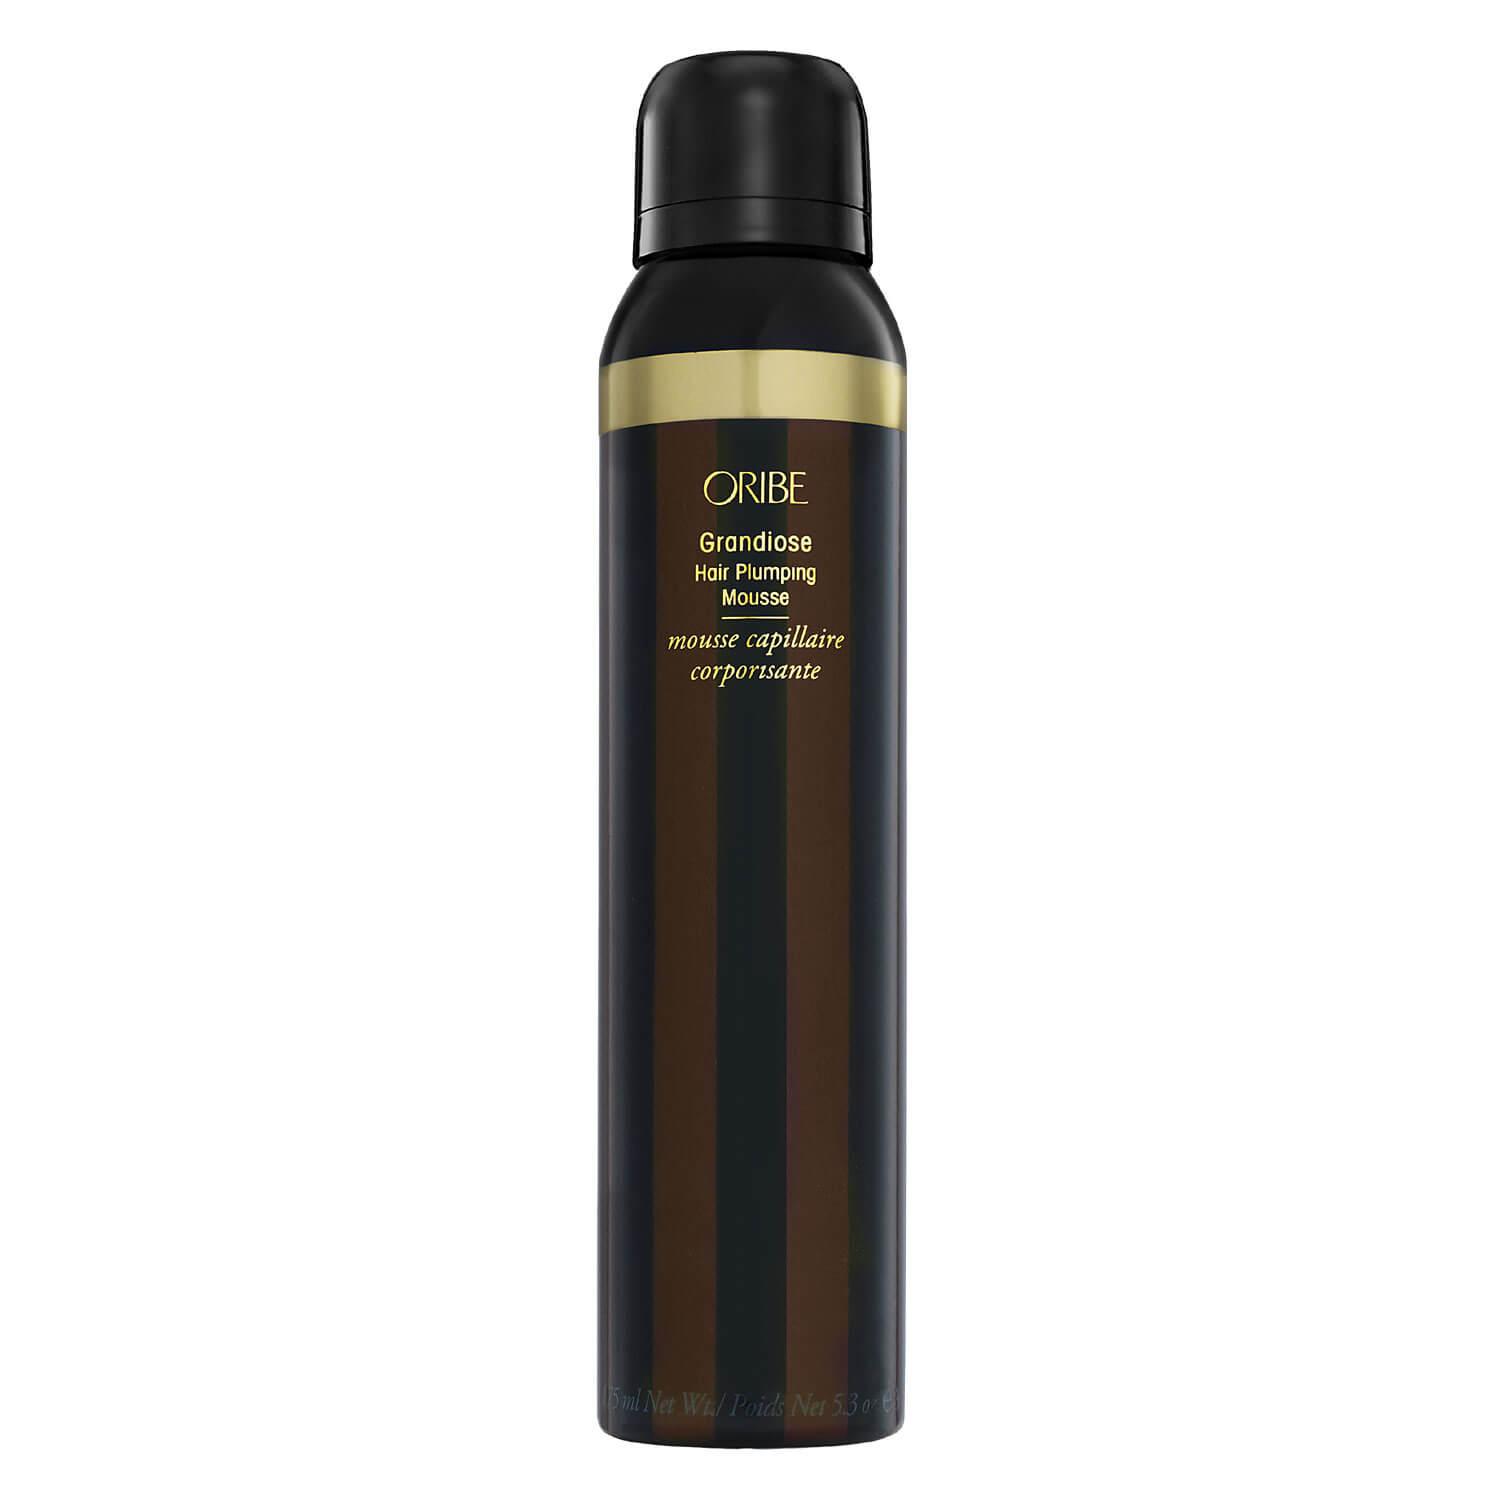 Oribe Style - Grandiose Hair Plumping Mousse